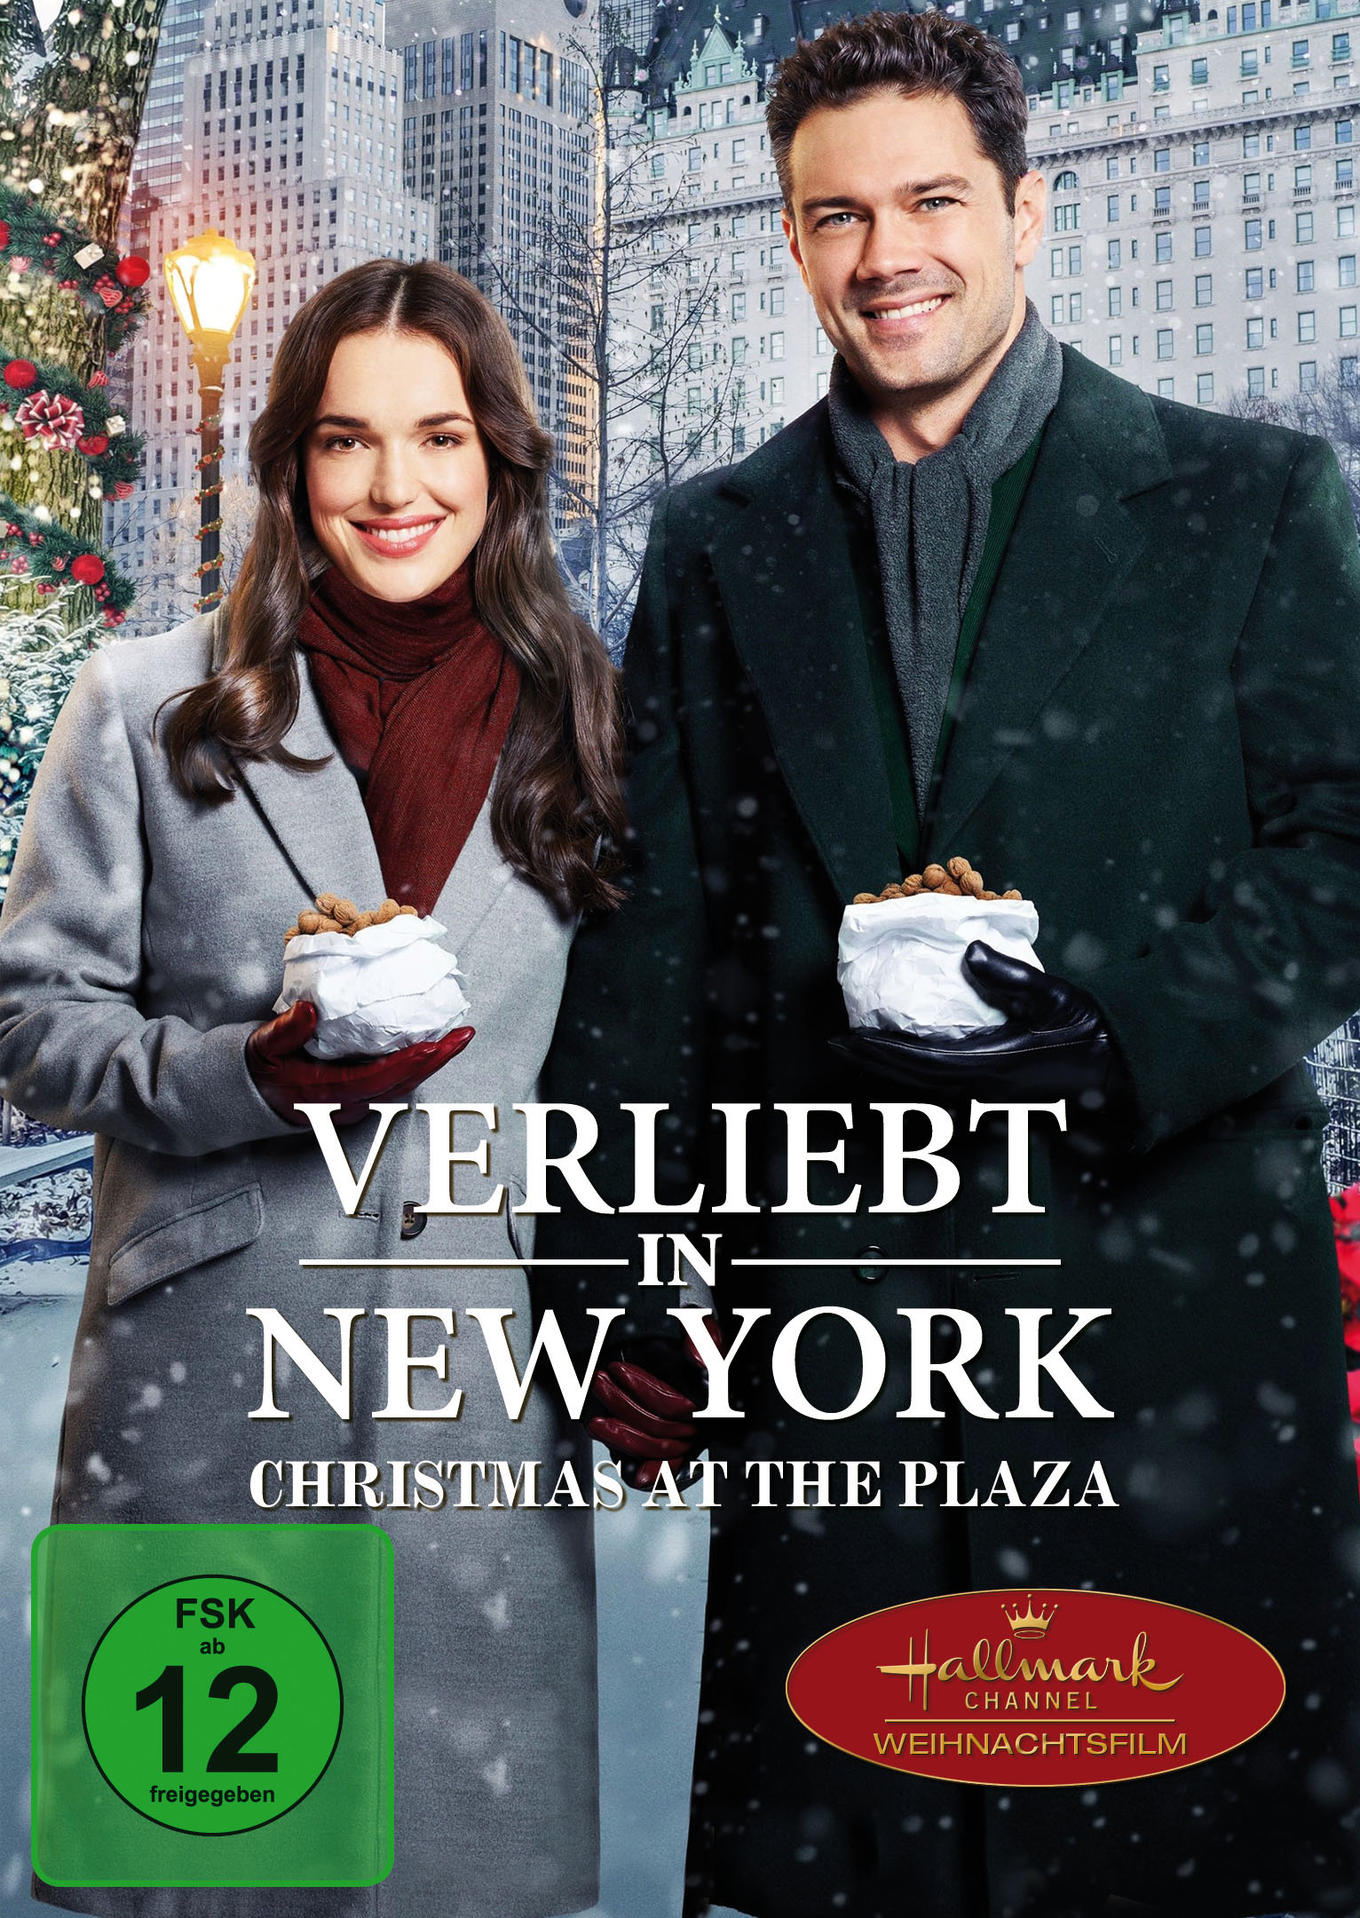 the Christmas at New - DVD in York Verliebt Plaza